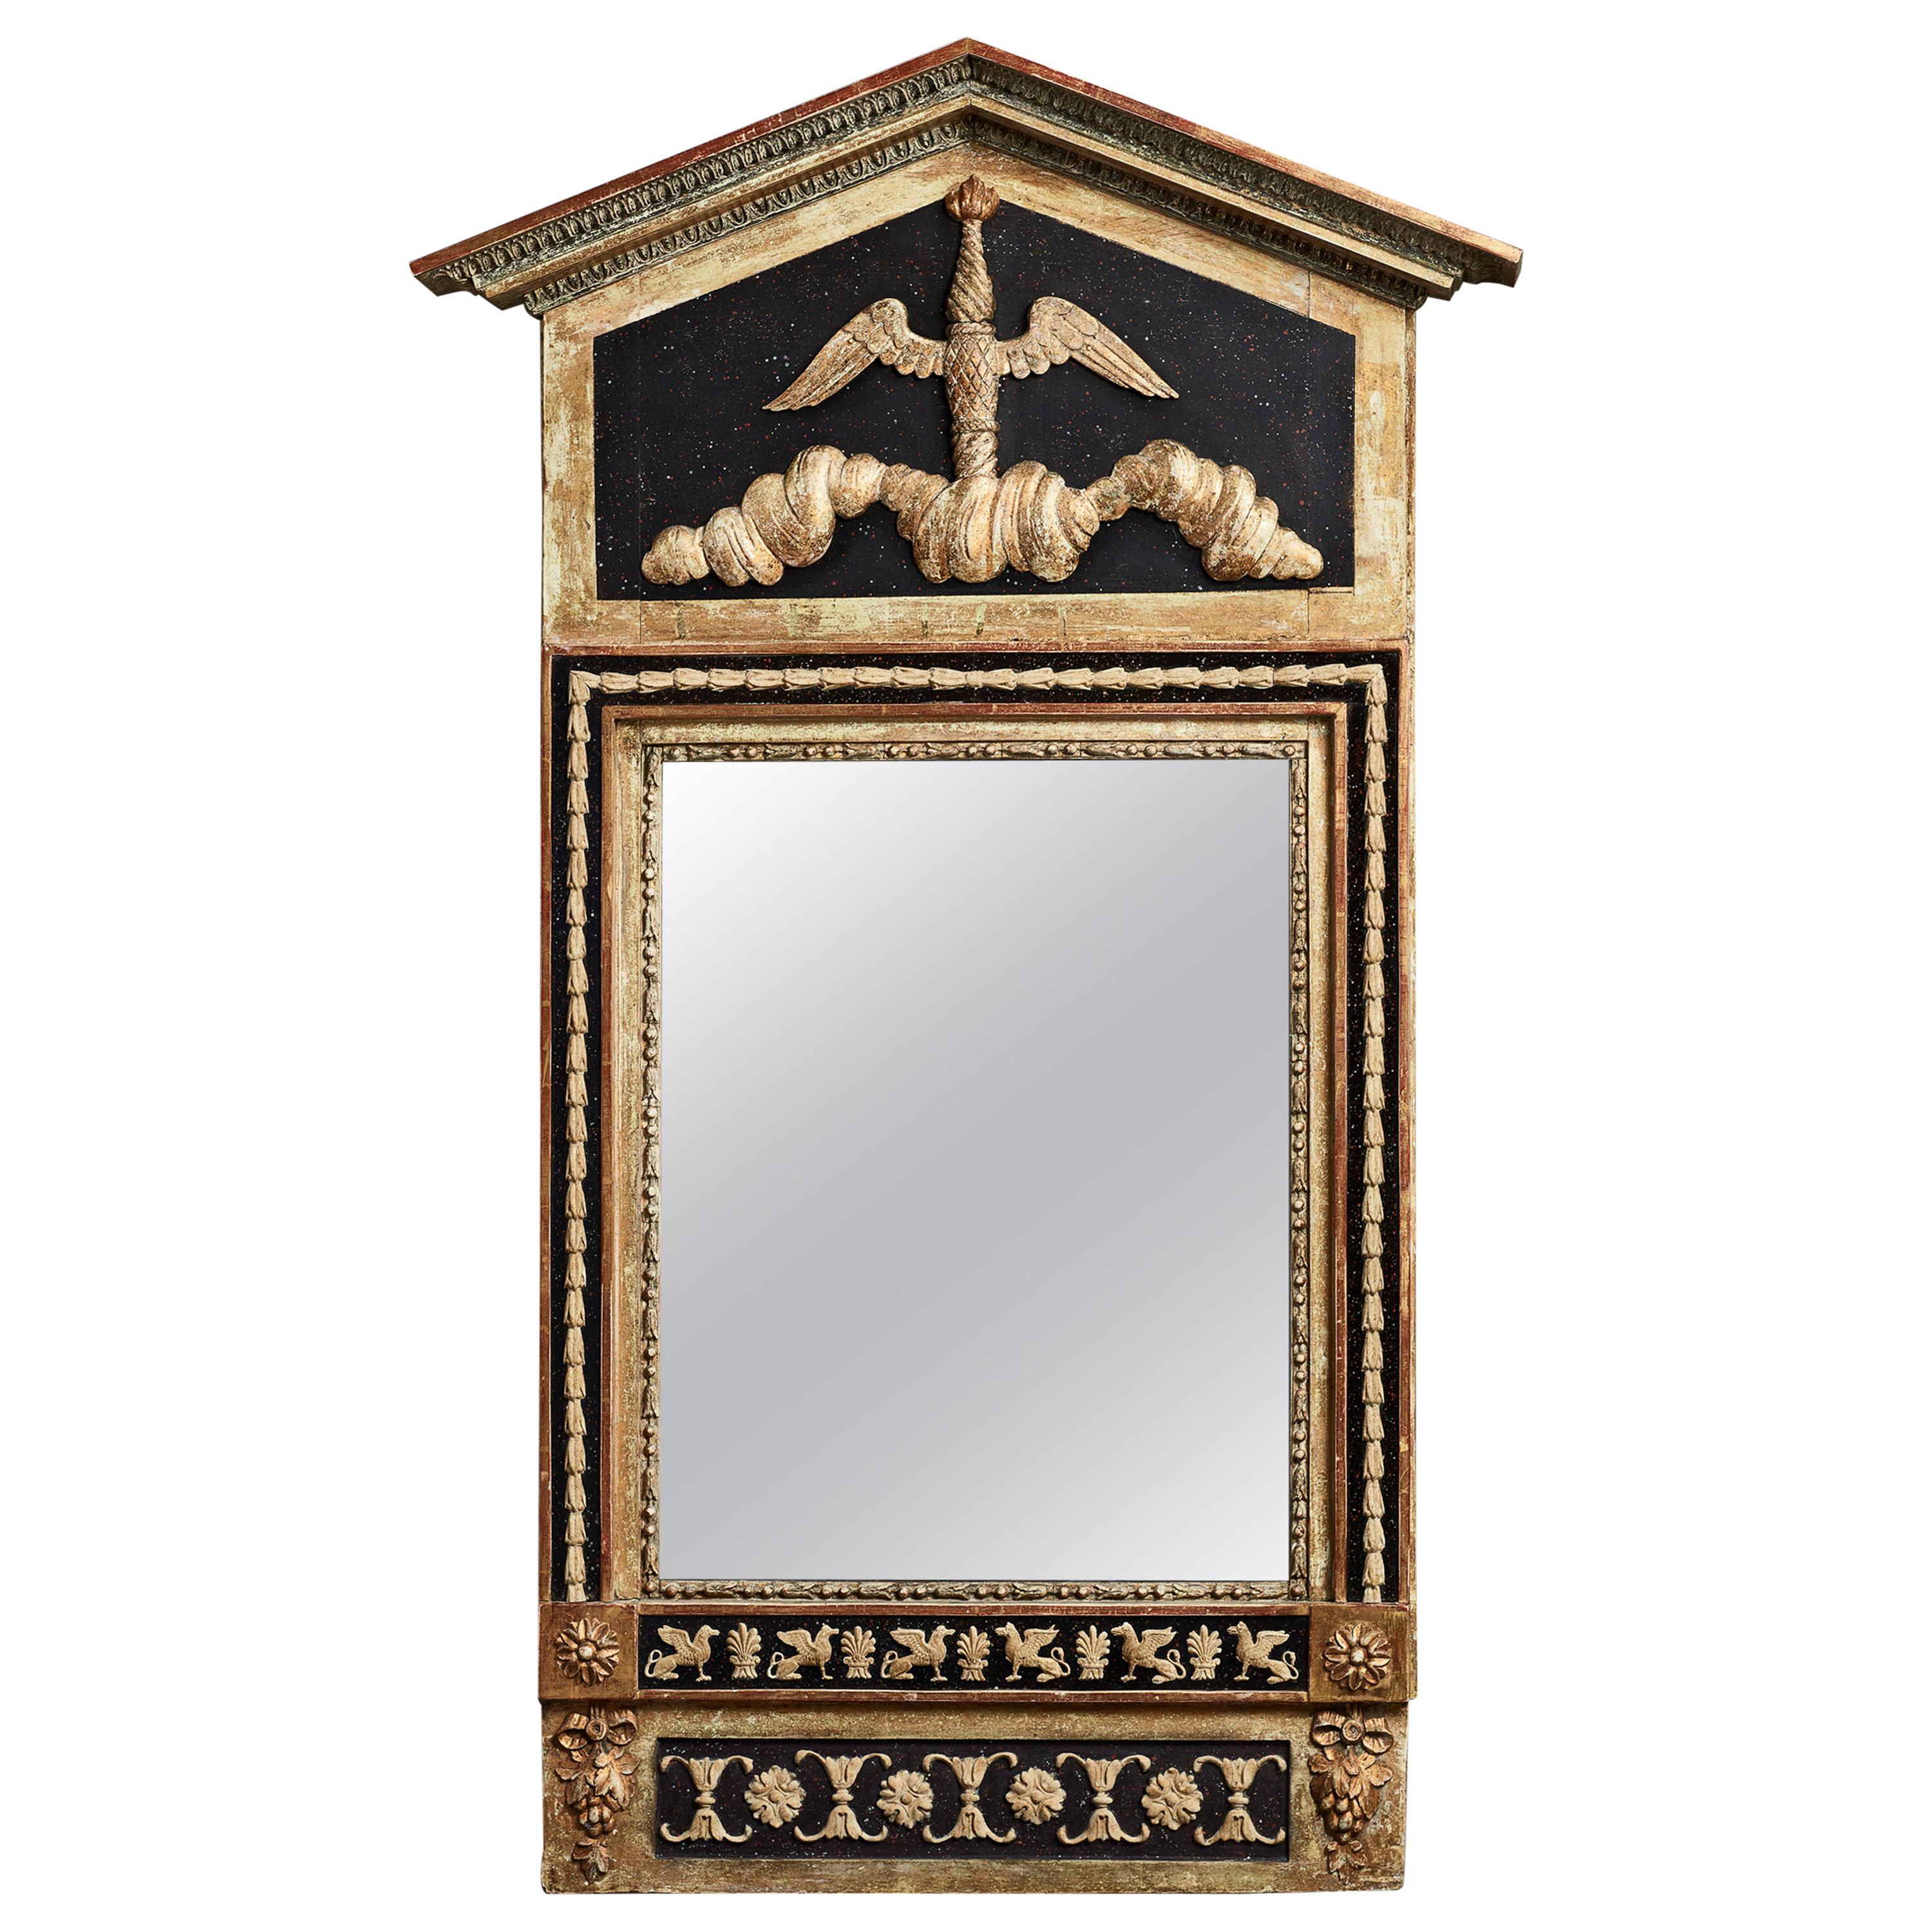 Early 19th Century Swedish Neoclassical Gustavian Wall Mirror with Faux Porphyry